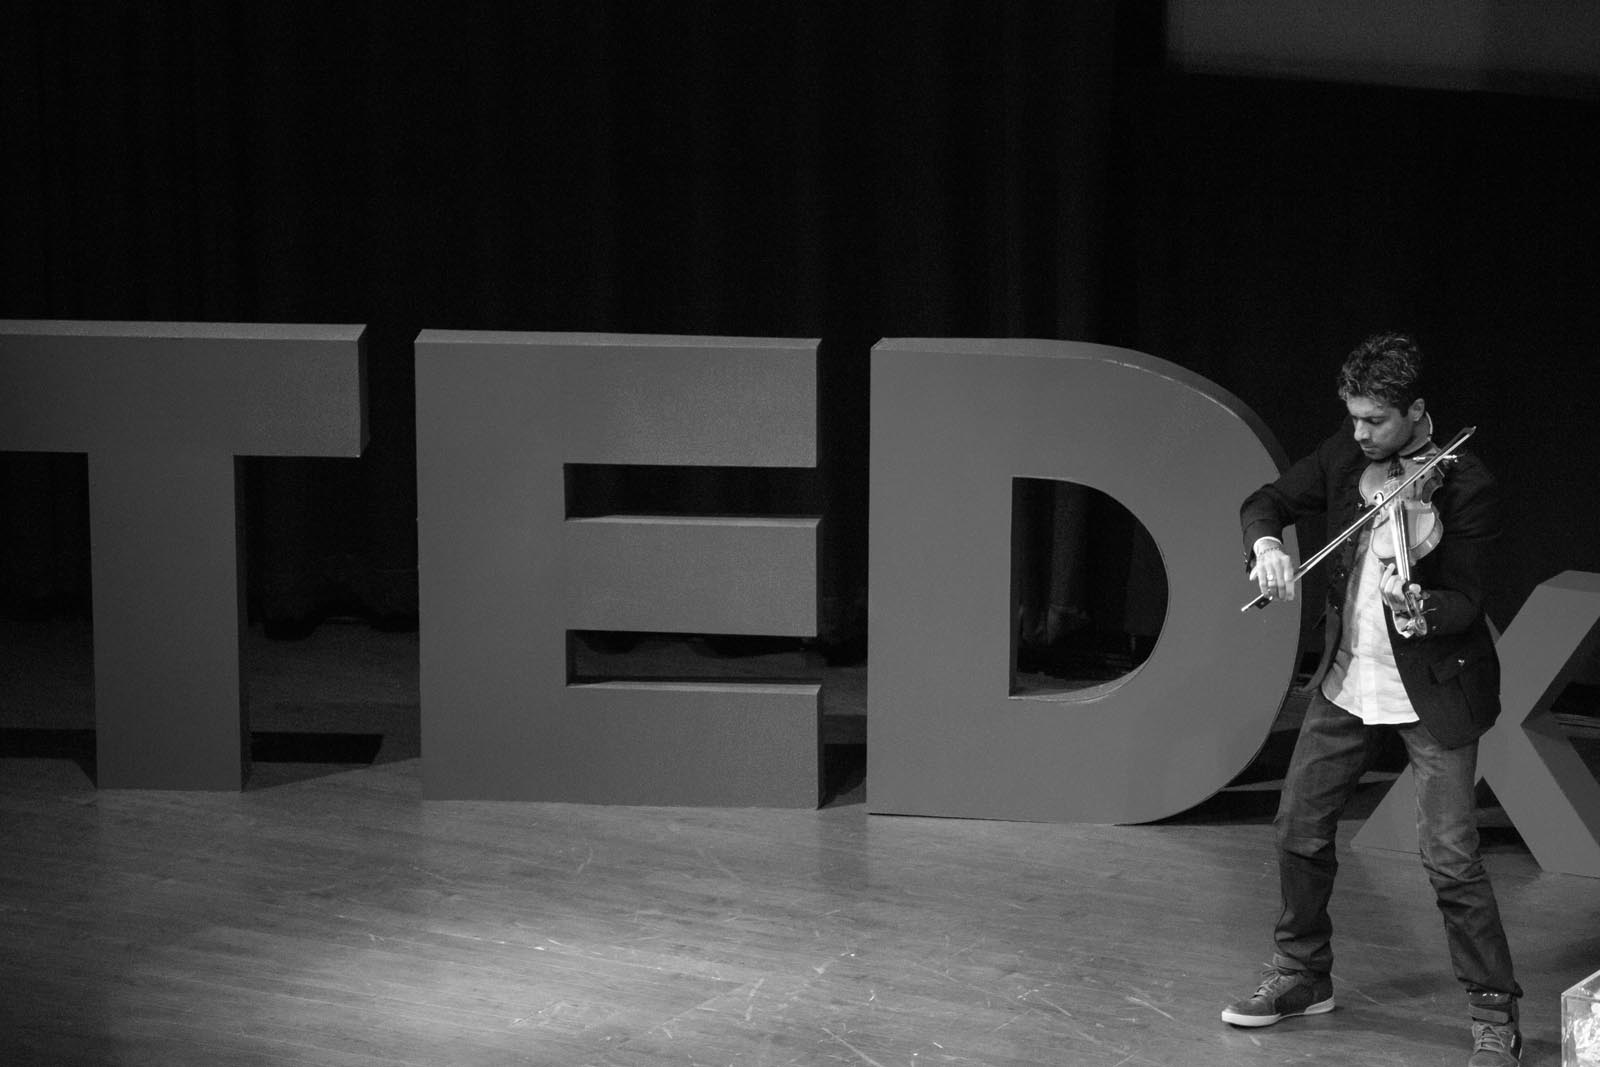 TEDx Youth